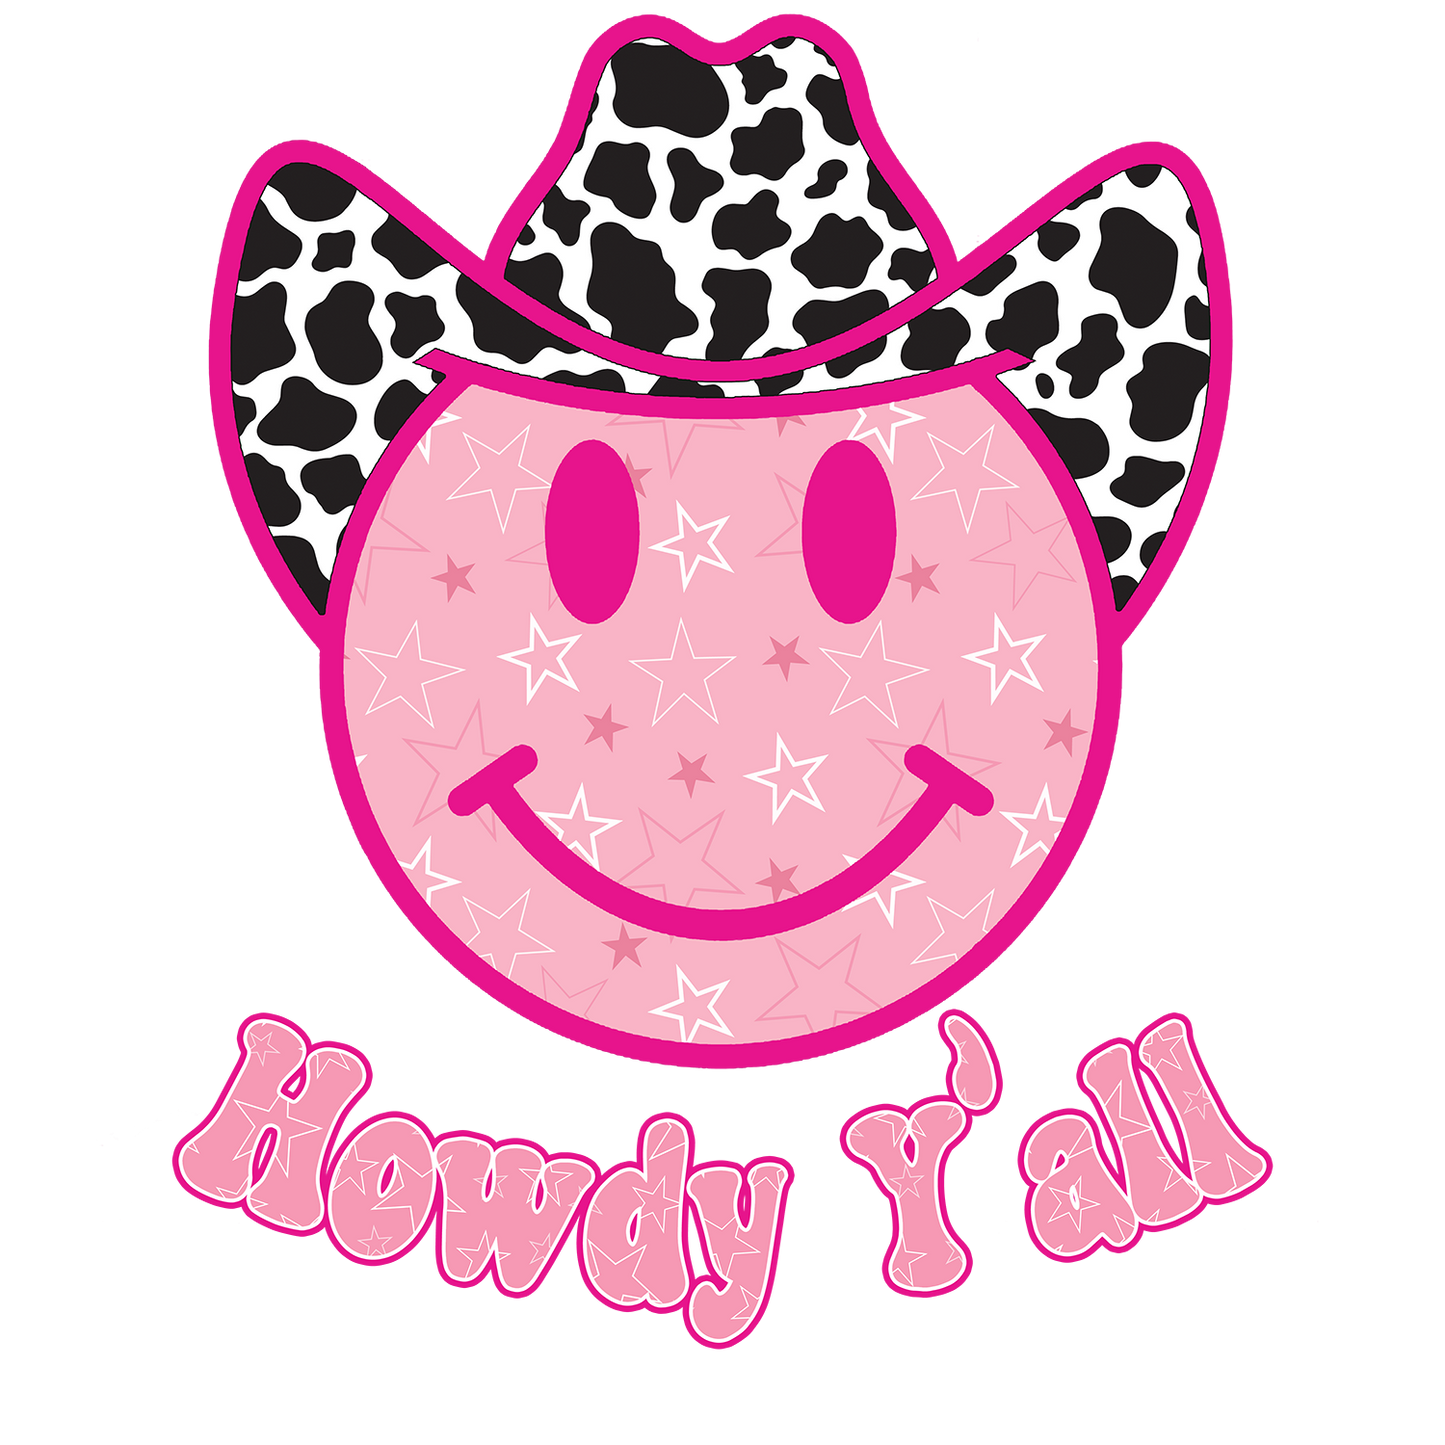 Howdy Y'all Smiley Face Western Graphic Coaster